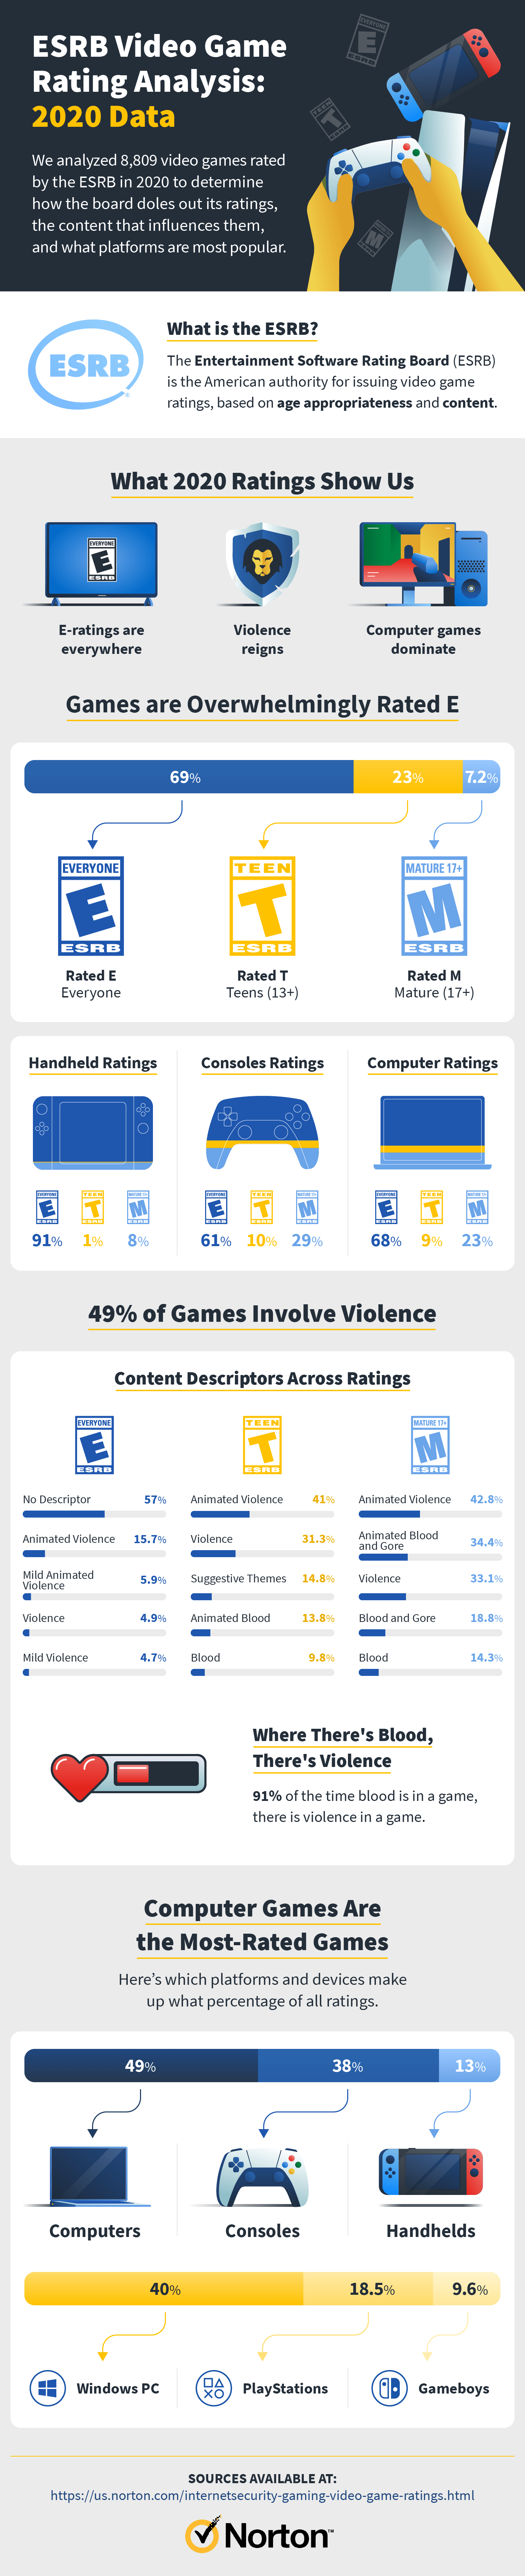 esrb video game infographic